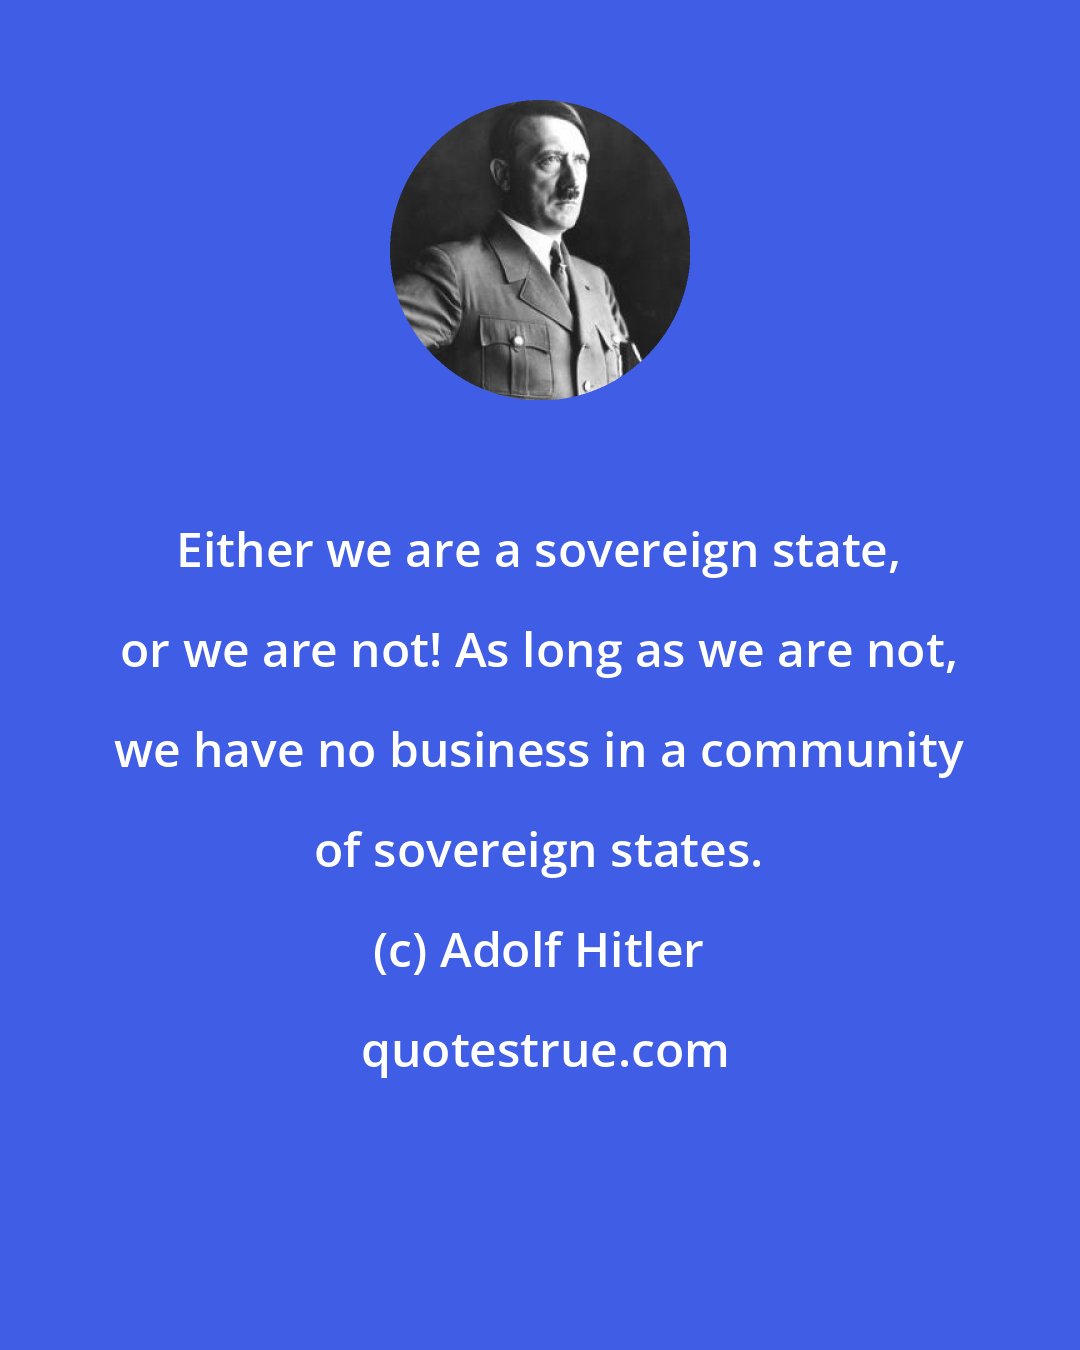 Adolf Hitler: Either we are a sovereign state, or we are not! As long as we are not, we have no business in a community of sovereign states.